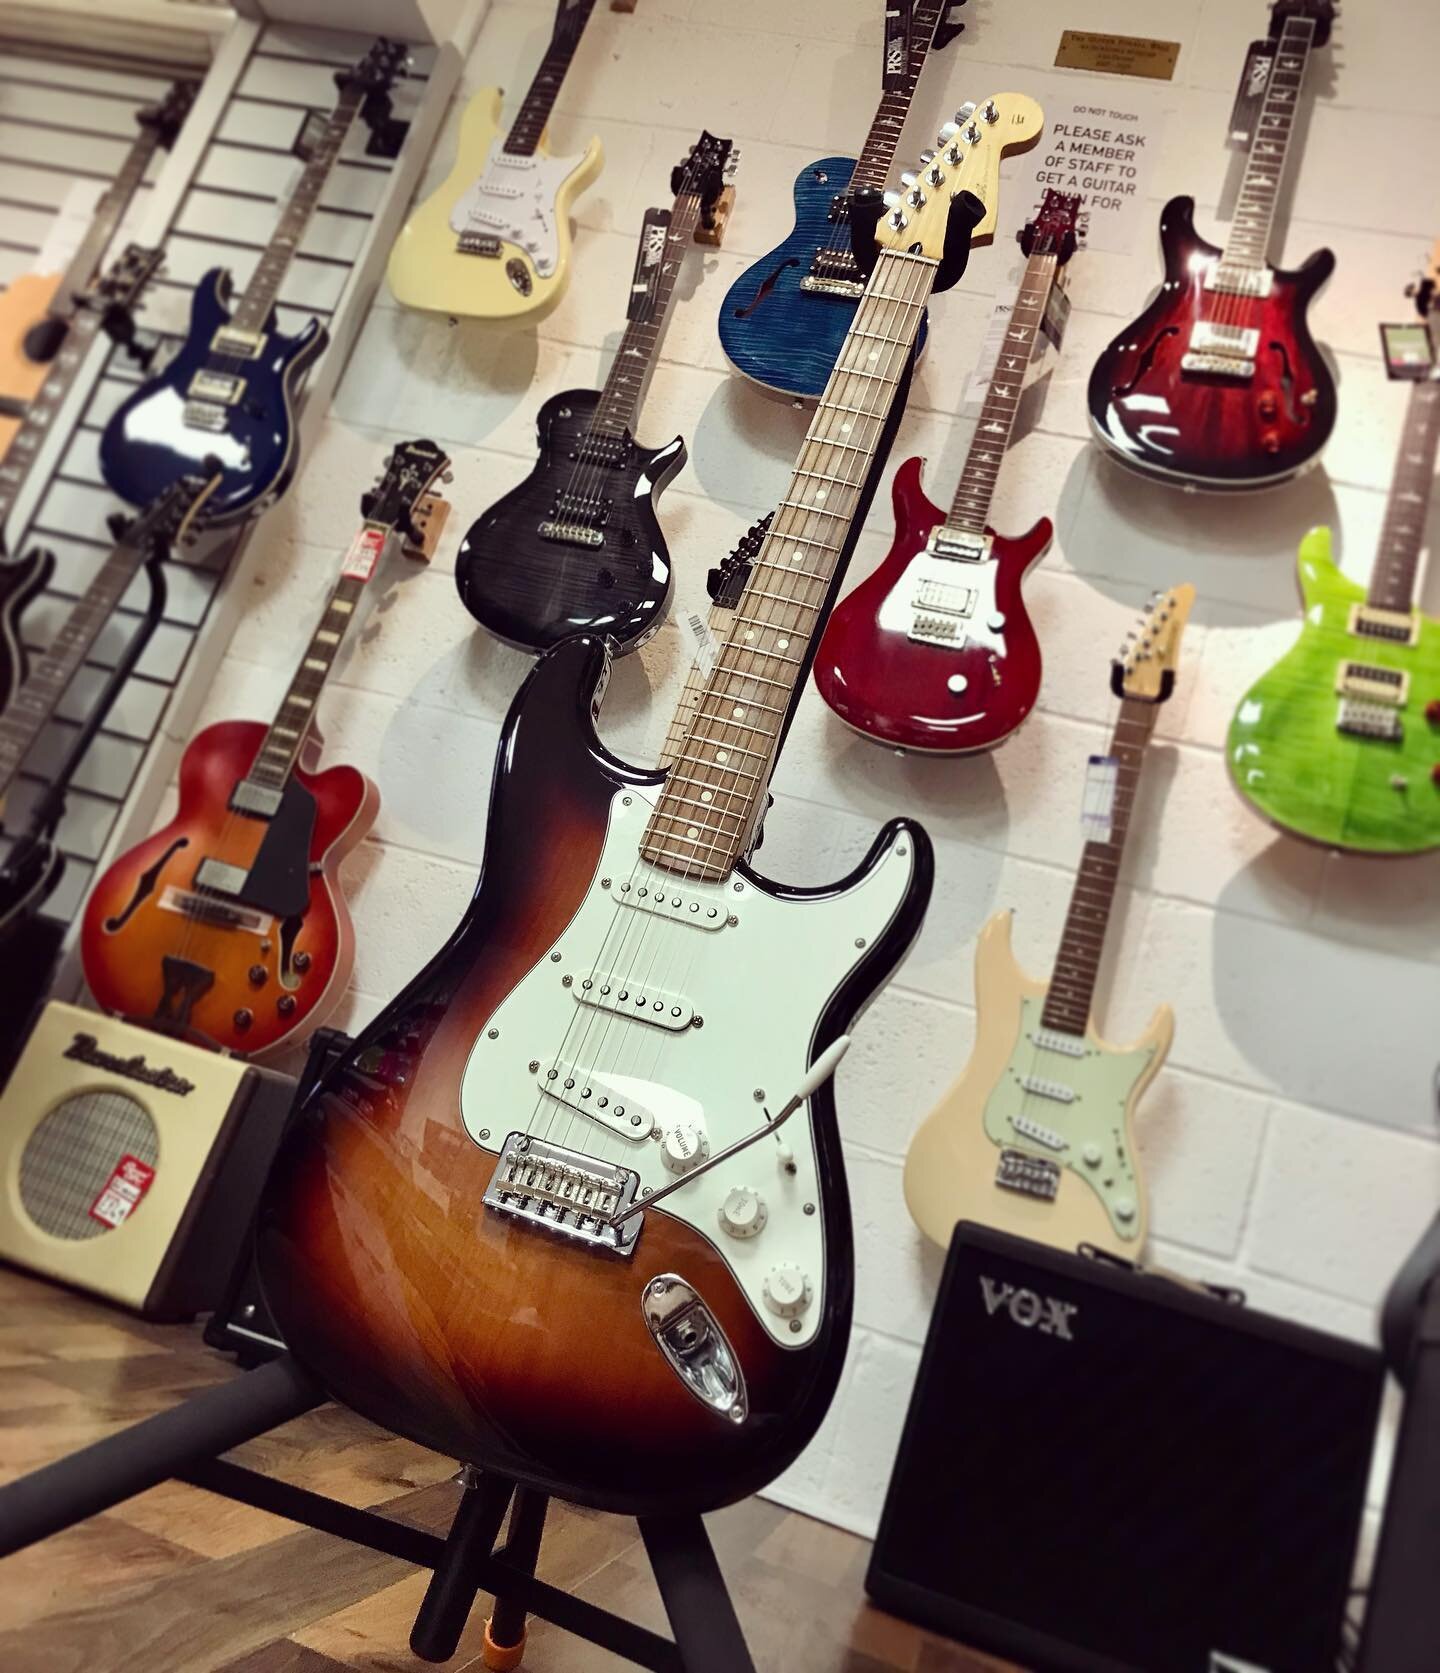 Got that Fender Friday feelin&rsquo; 🎸 
Latest trade-in is this @fender Strat Sunburst MIM ☀️ 
We don&rsquo;t expect this to stick around so if you&rsquo;re interested it&rsquo;s available in-store and online now!